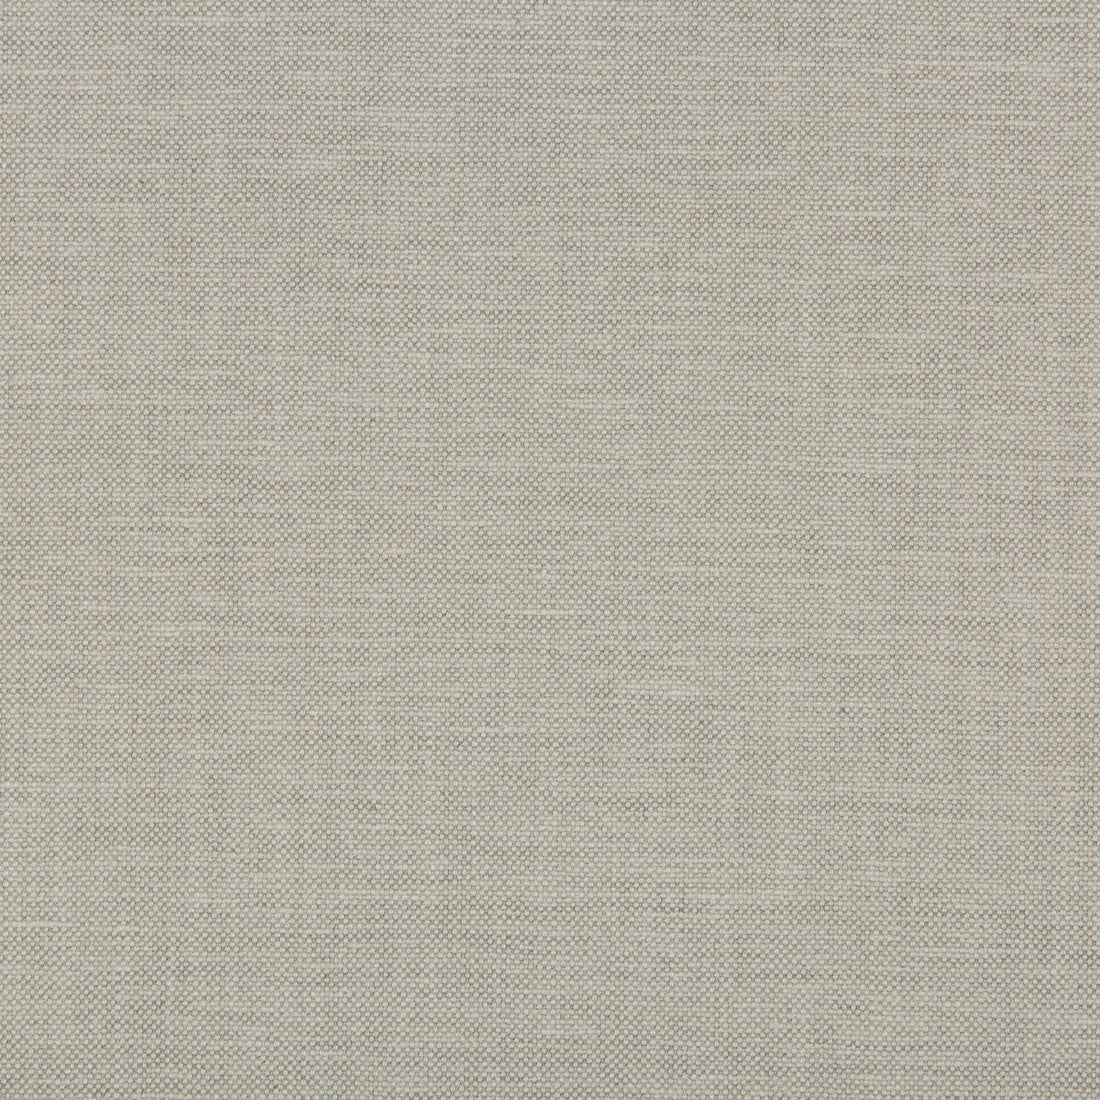 Oxfordian fabric in stone color - pattern 35543.106.0 - by Kravet Basics in the Bermuda collection